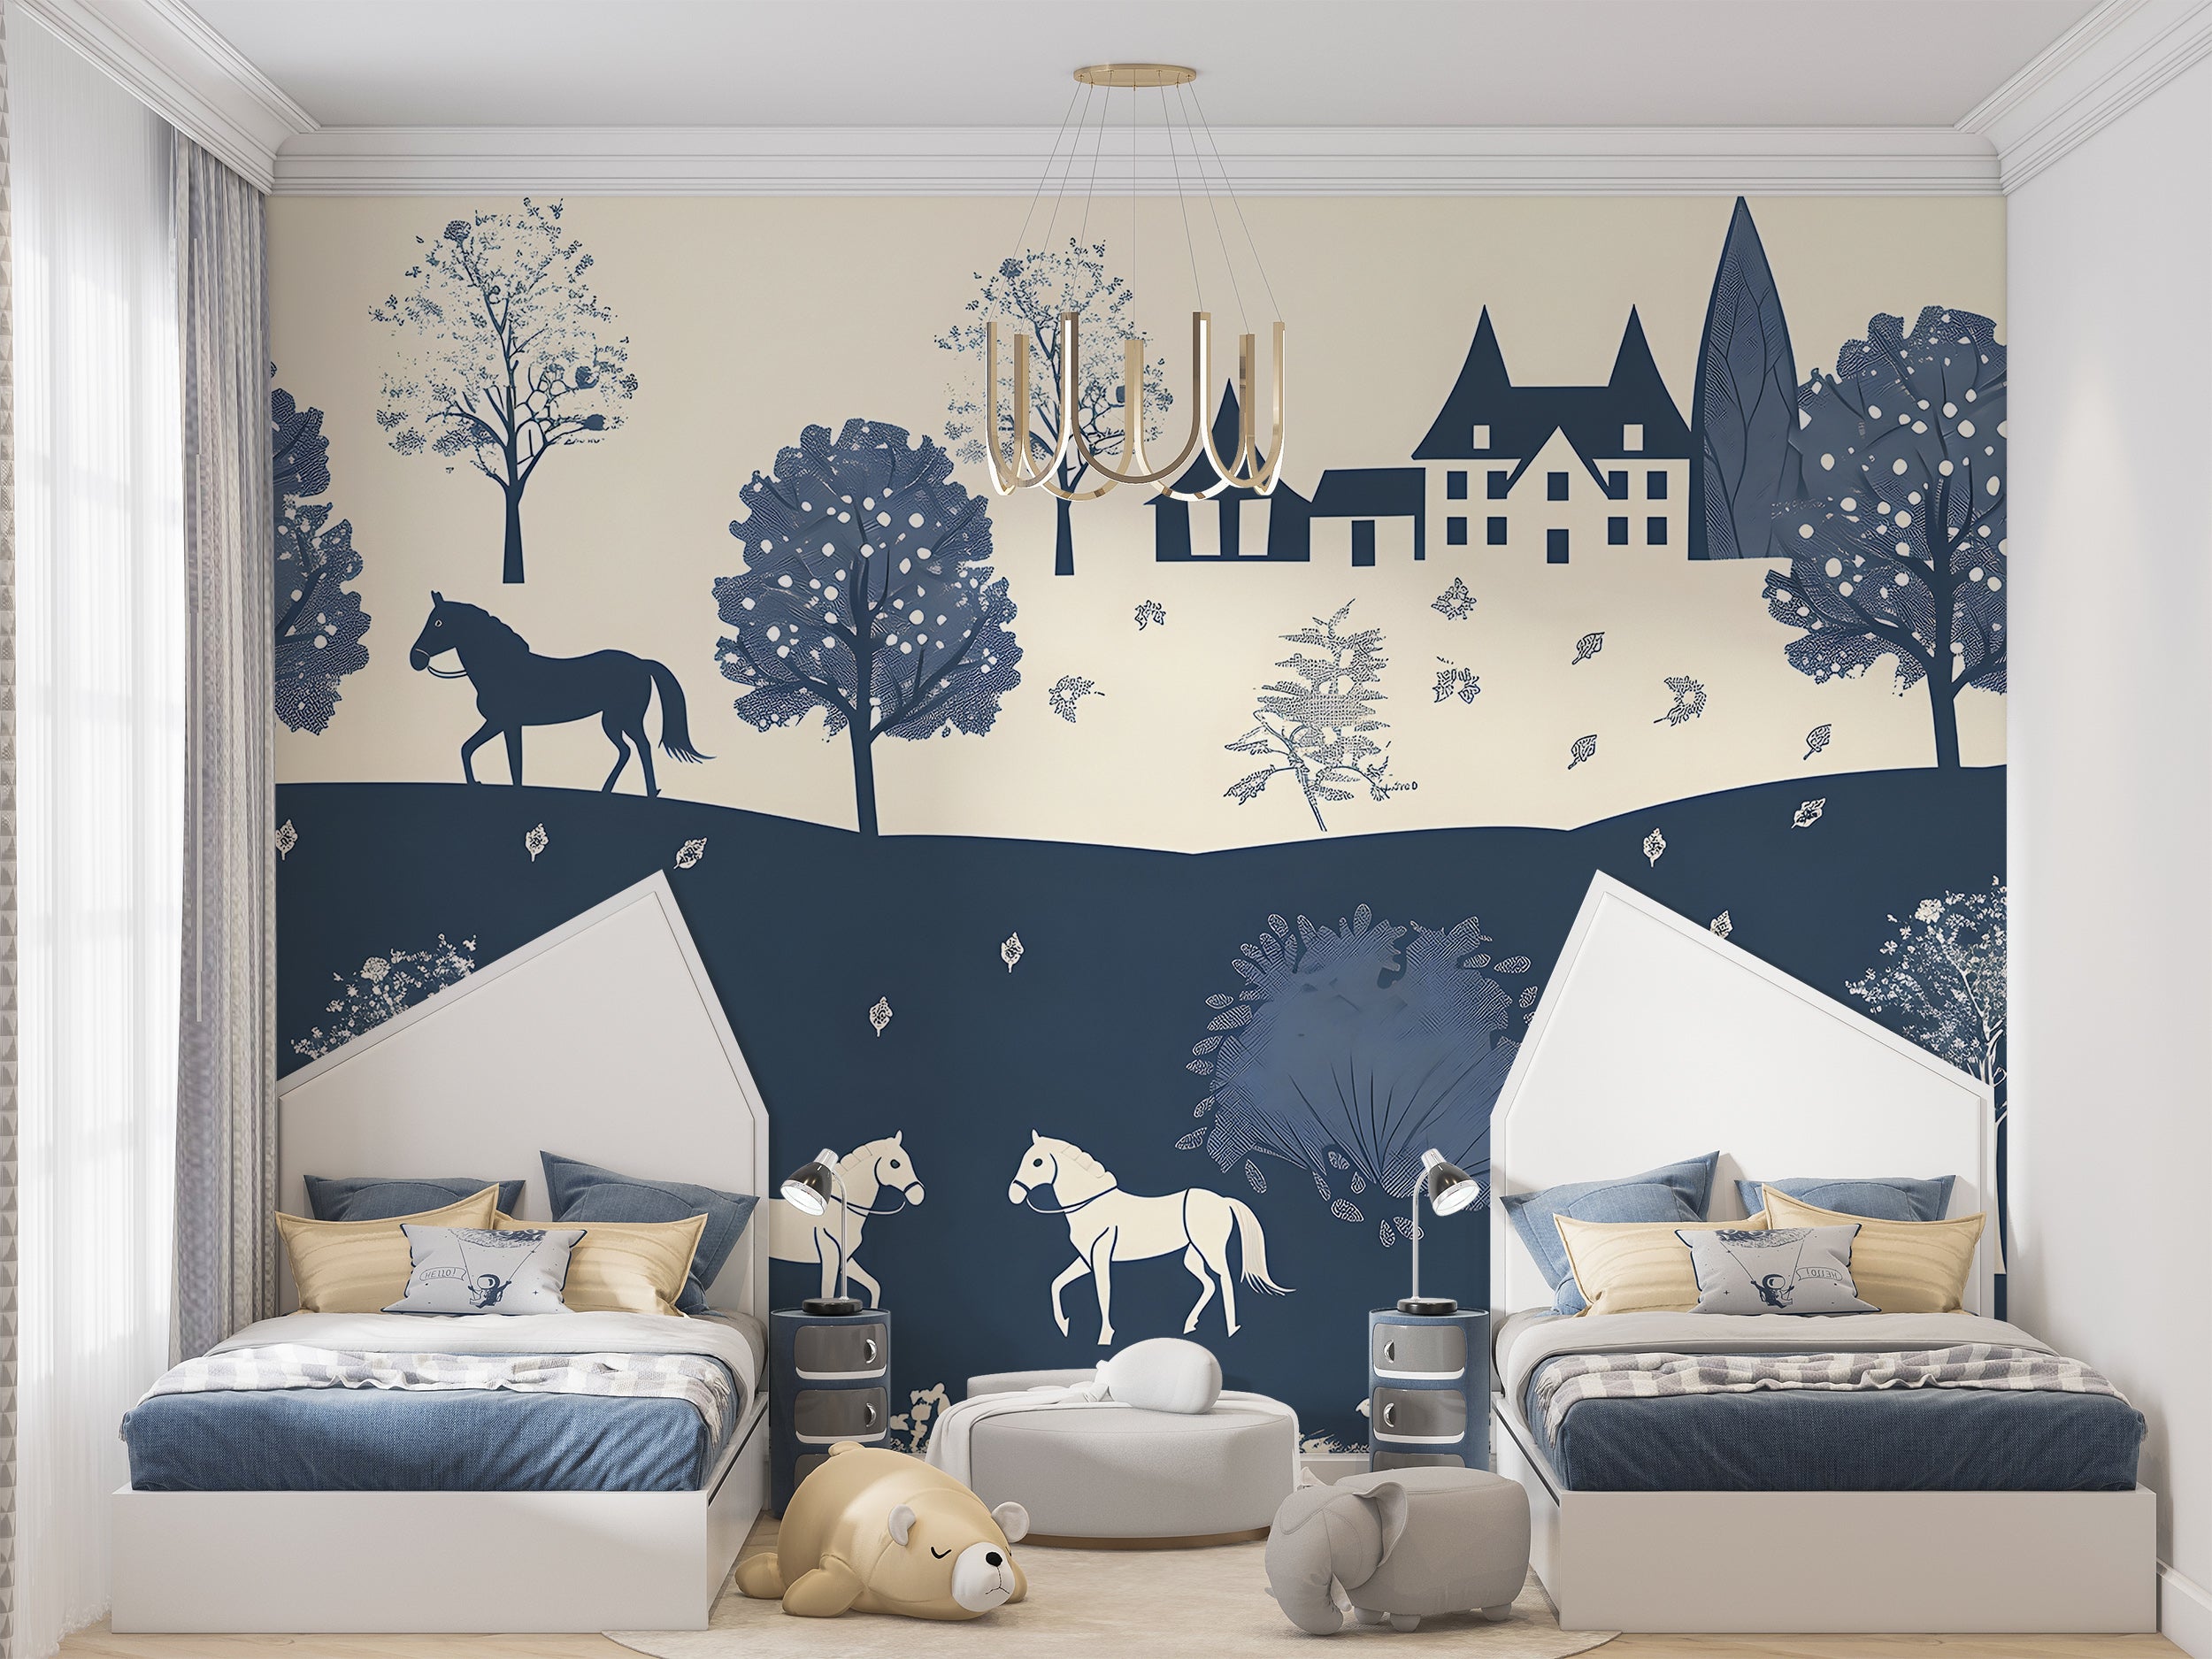 Blue and Beige Traditional Wallpaper, Watercolor Old Town Landscape Mural, Horizontal Seamless Pattern Classic Wallpaper, Peel and Stick House and Horses